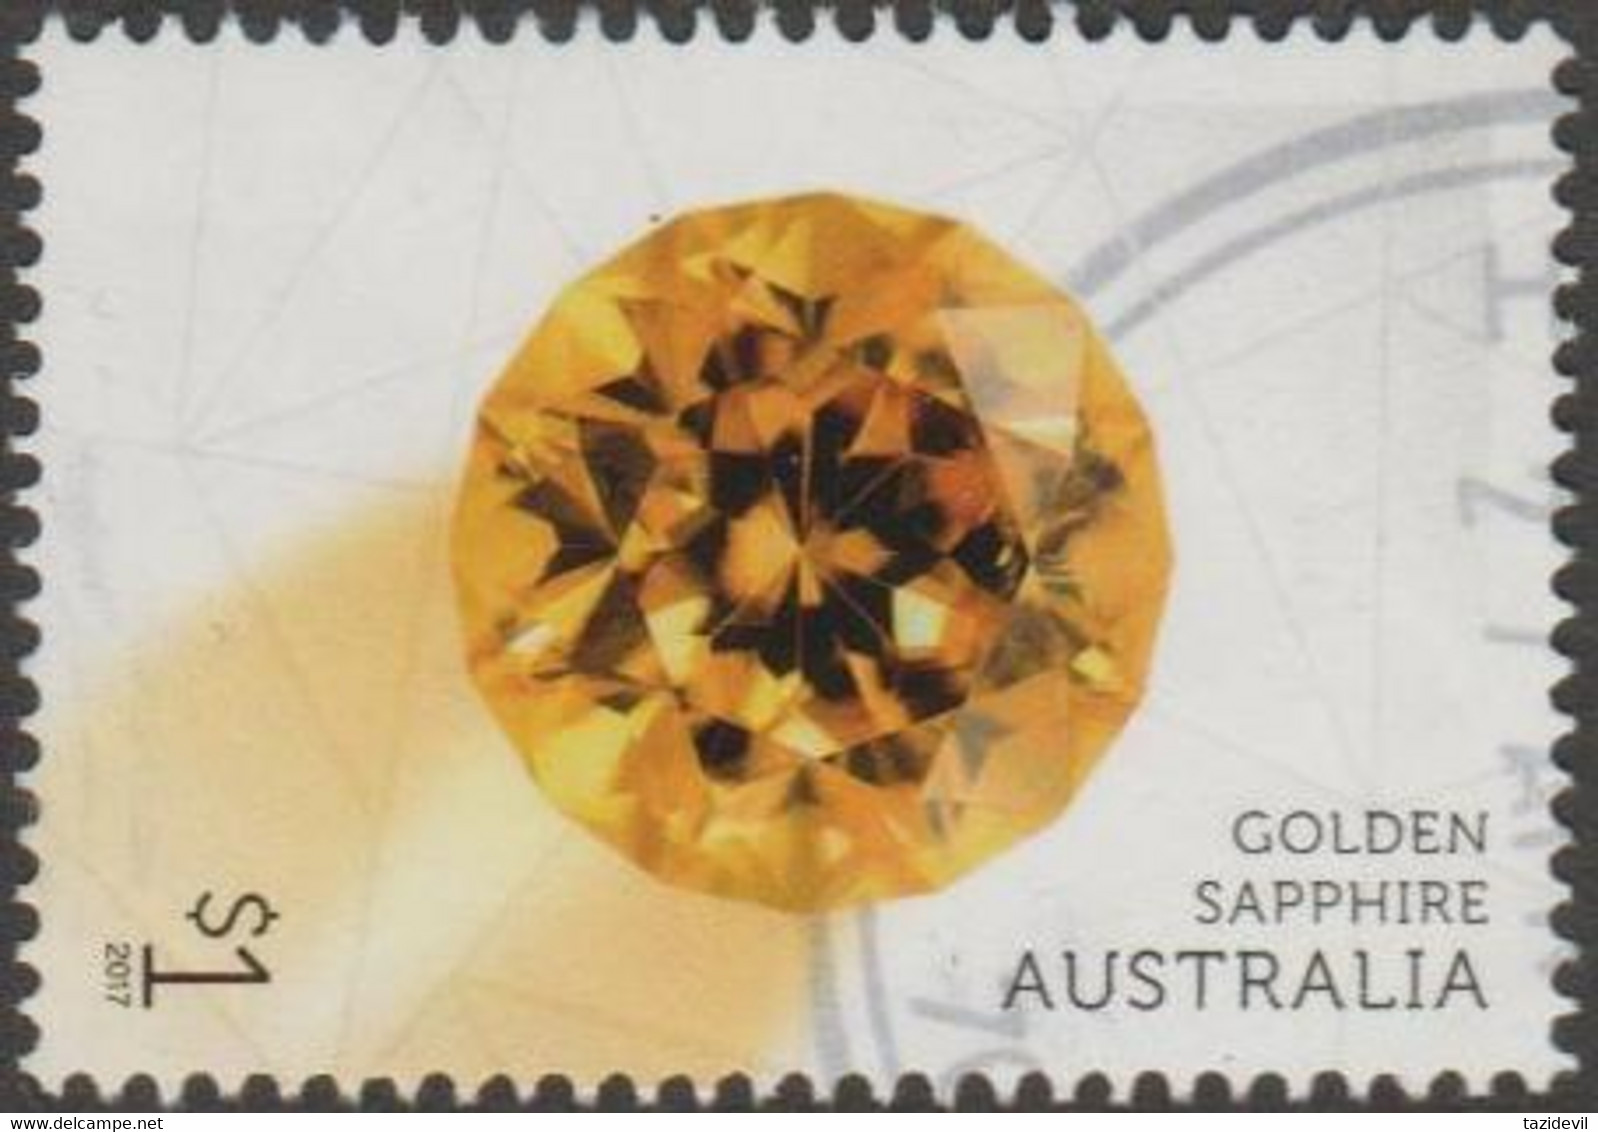 AUSTRALIA - USED 2017 $1.00 Rare Beauties - Jewels - Golden Sapphire - Used Stamps